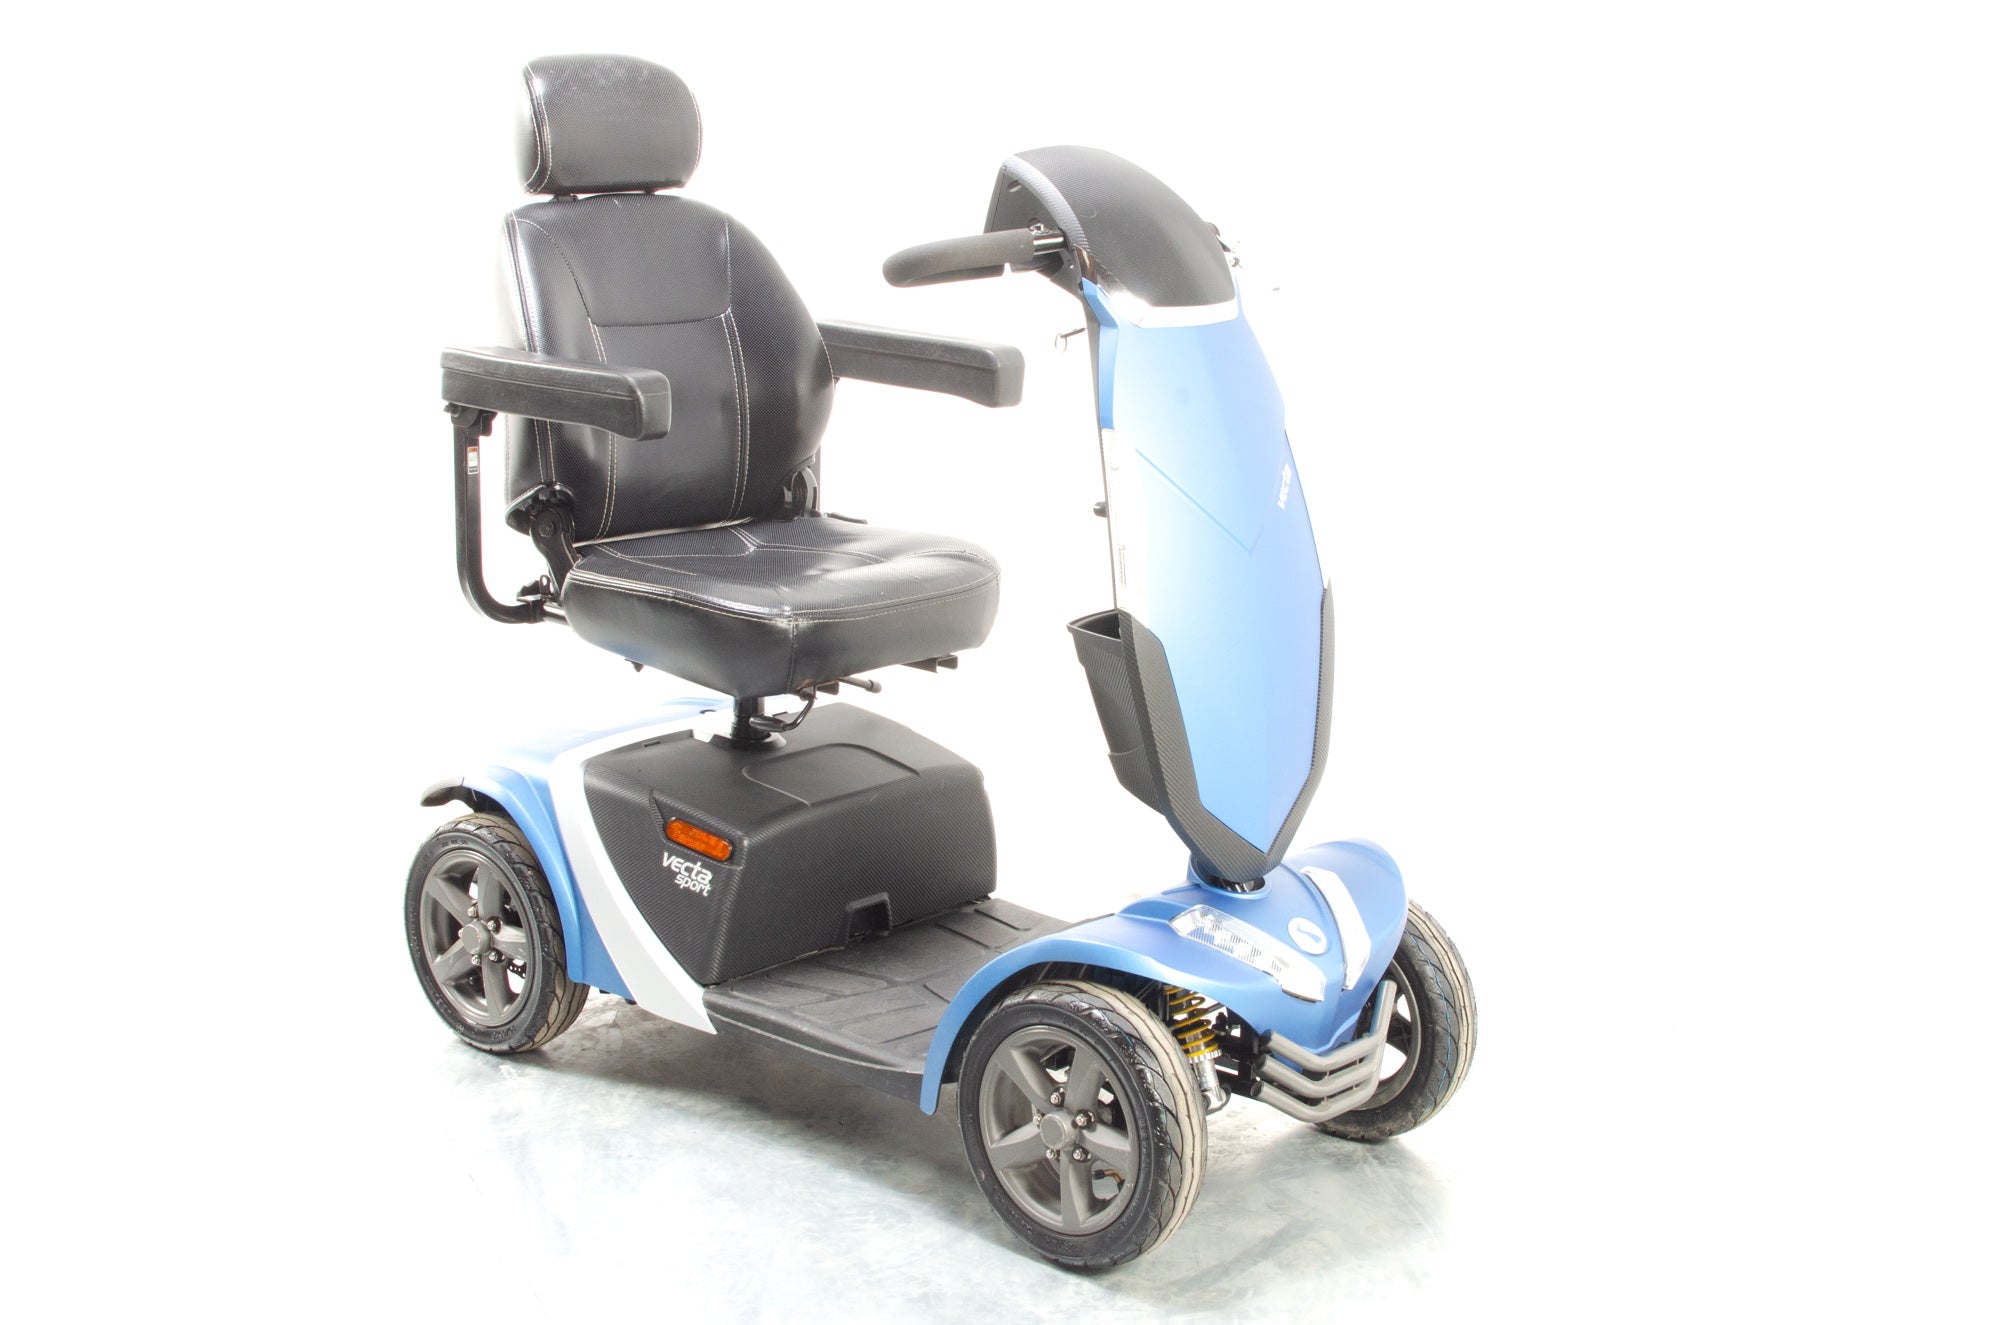 Rascal Vecta Sport Compact Used Electric Mobility Scooter 8mph Max Grip Suspension All-Terrain